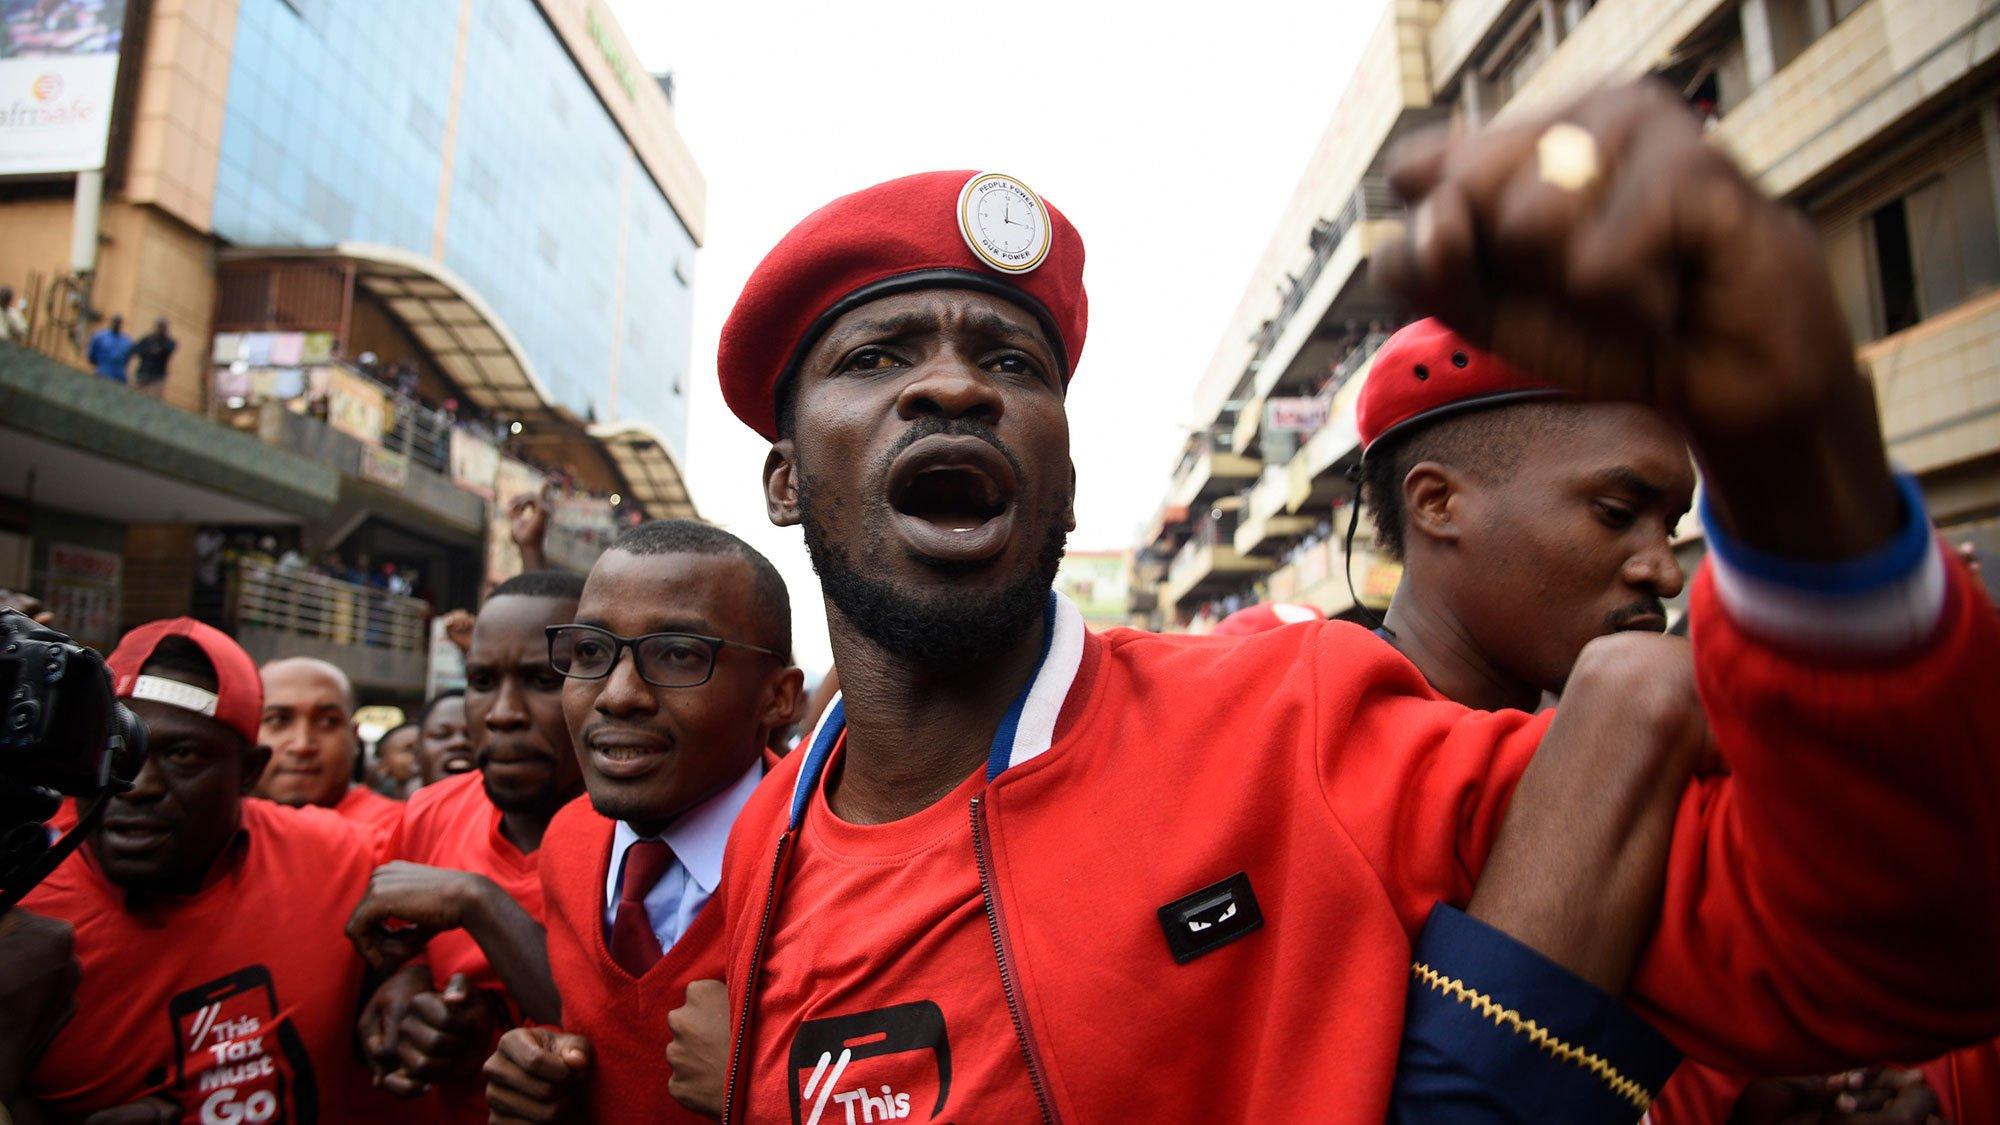 A close-up photo of Bobi Wine shows his fist raised among a crowd during an exchange with Uganda People's Defence Forces and Local Defence Unit after they stopped his procession as he headed for his campaigns on Nov. 30, 2020.